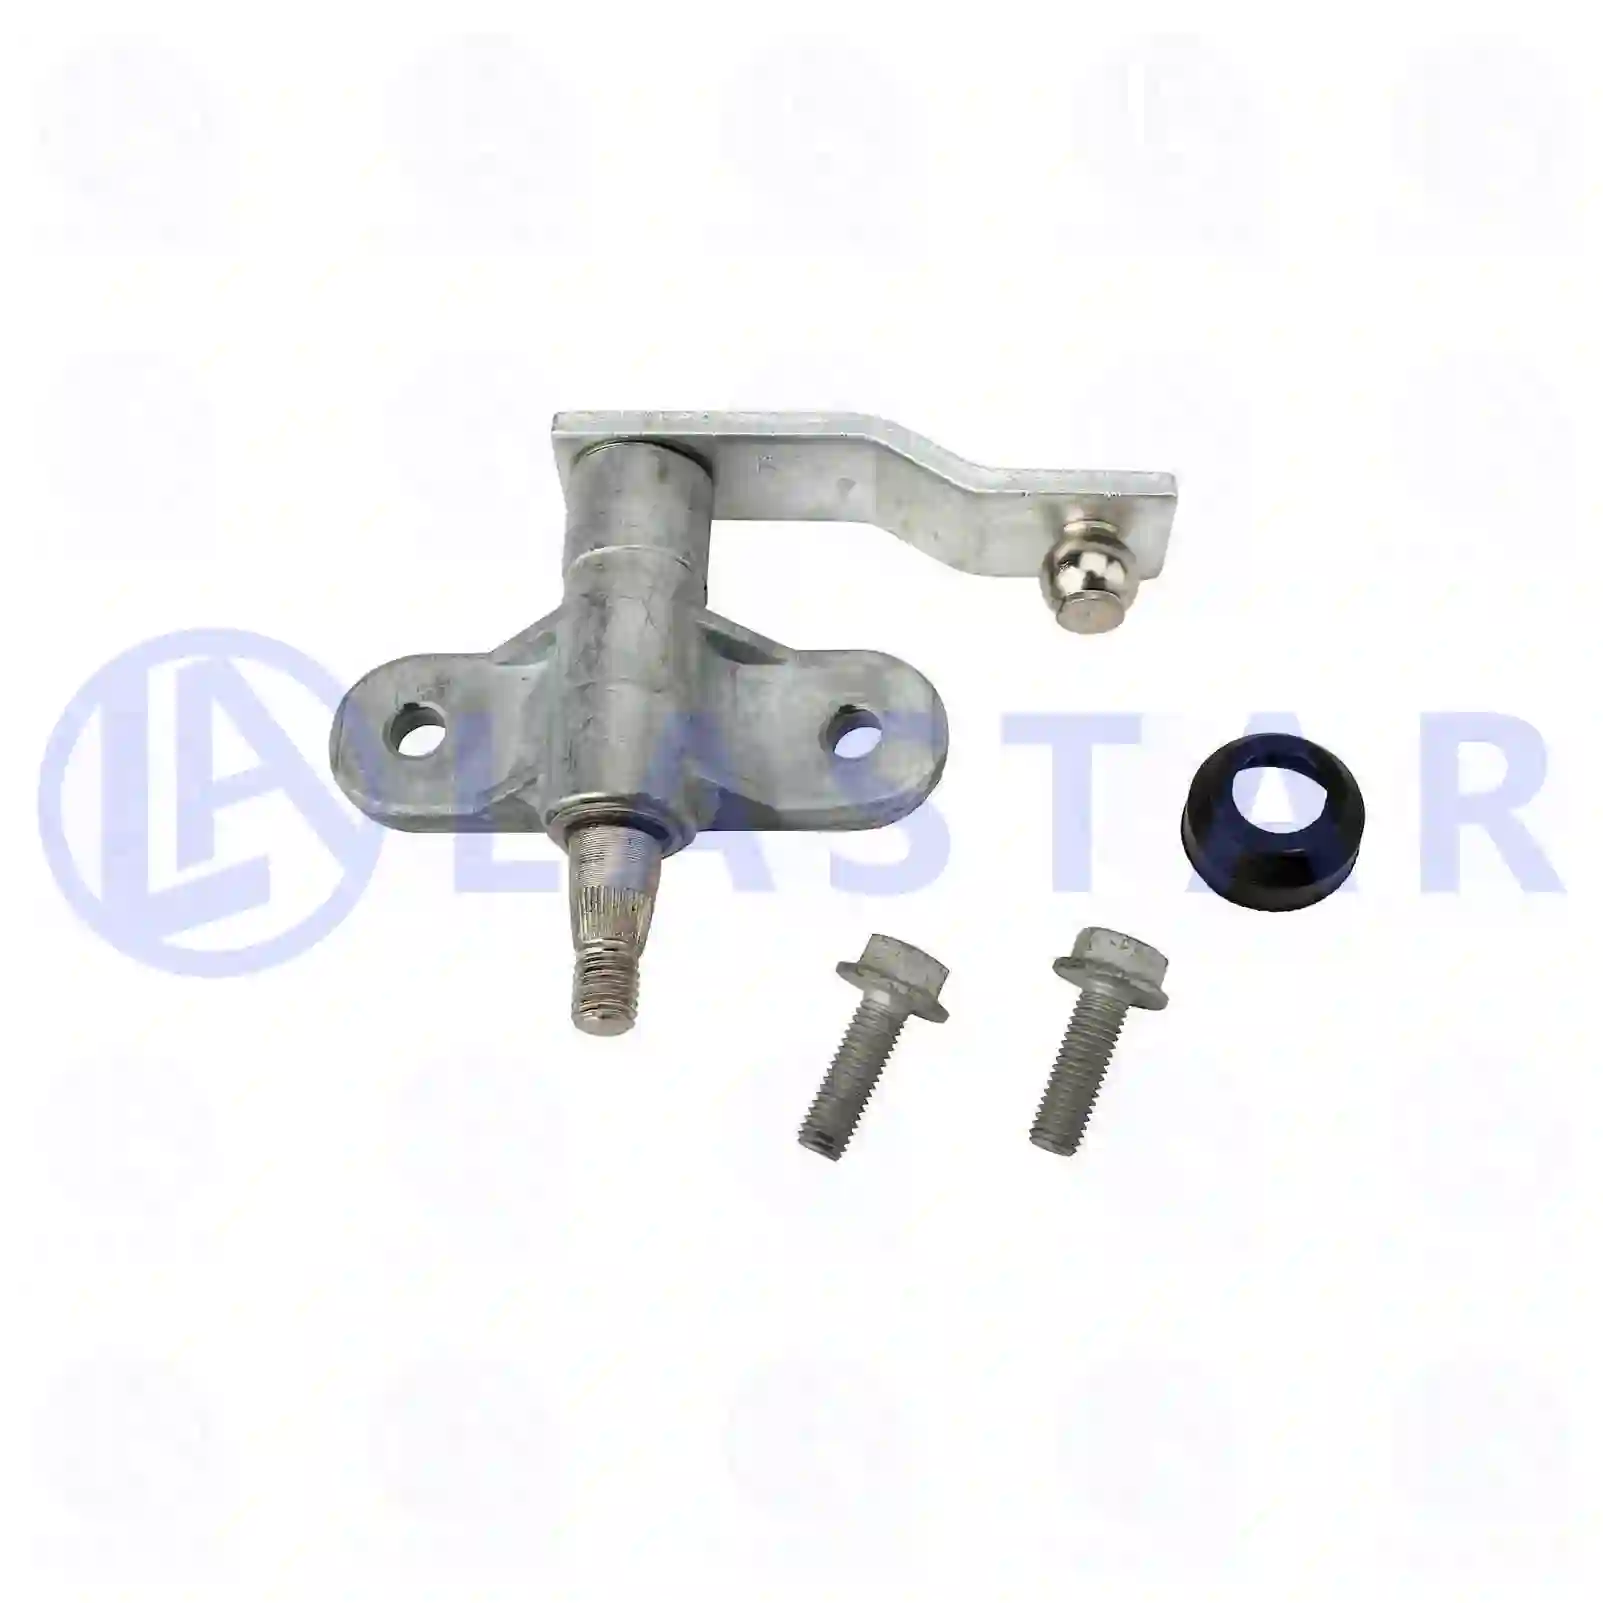 Wiper arm bearing, 77721432, 1337958, 1525892, 525892, ZG21292-0008 ||  77721432 Lastar Spare Part | Truck Spare Parts, Auotomotive Spare Parts Wiper arm bearing, 77721432, 1337958, 1525892, 525892, ZG21292-0008 ||  77721432 Lastar Spare Part | Truck Spare Parts, Auotomotive Spare Parts